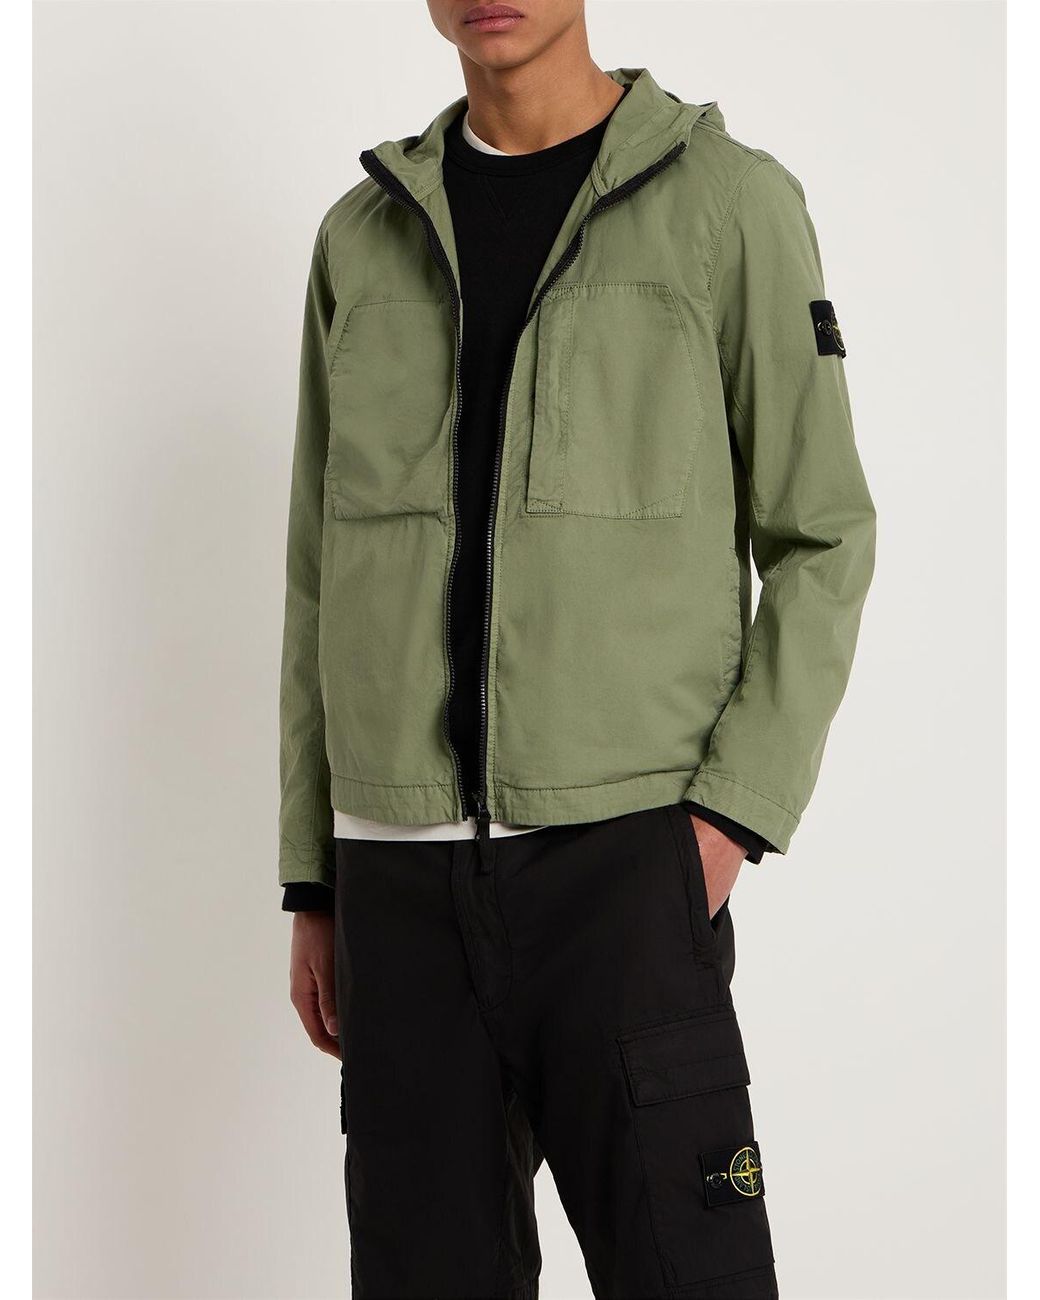 Stone Island Supima Cotton Twill Stretch Jacket in Green for Men Lyst  Canada